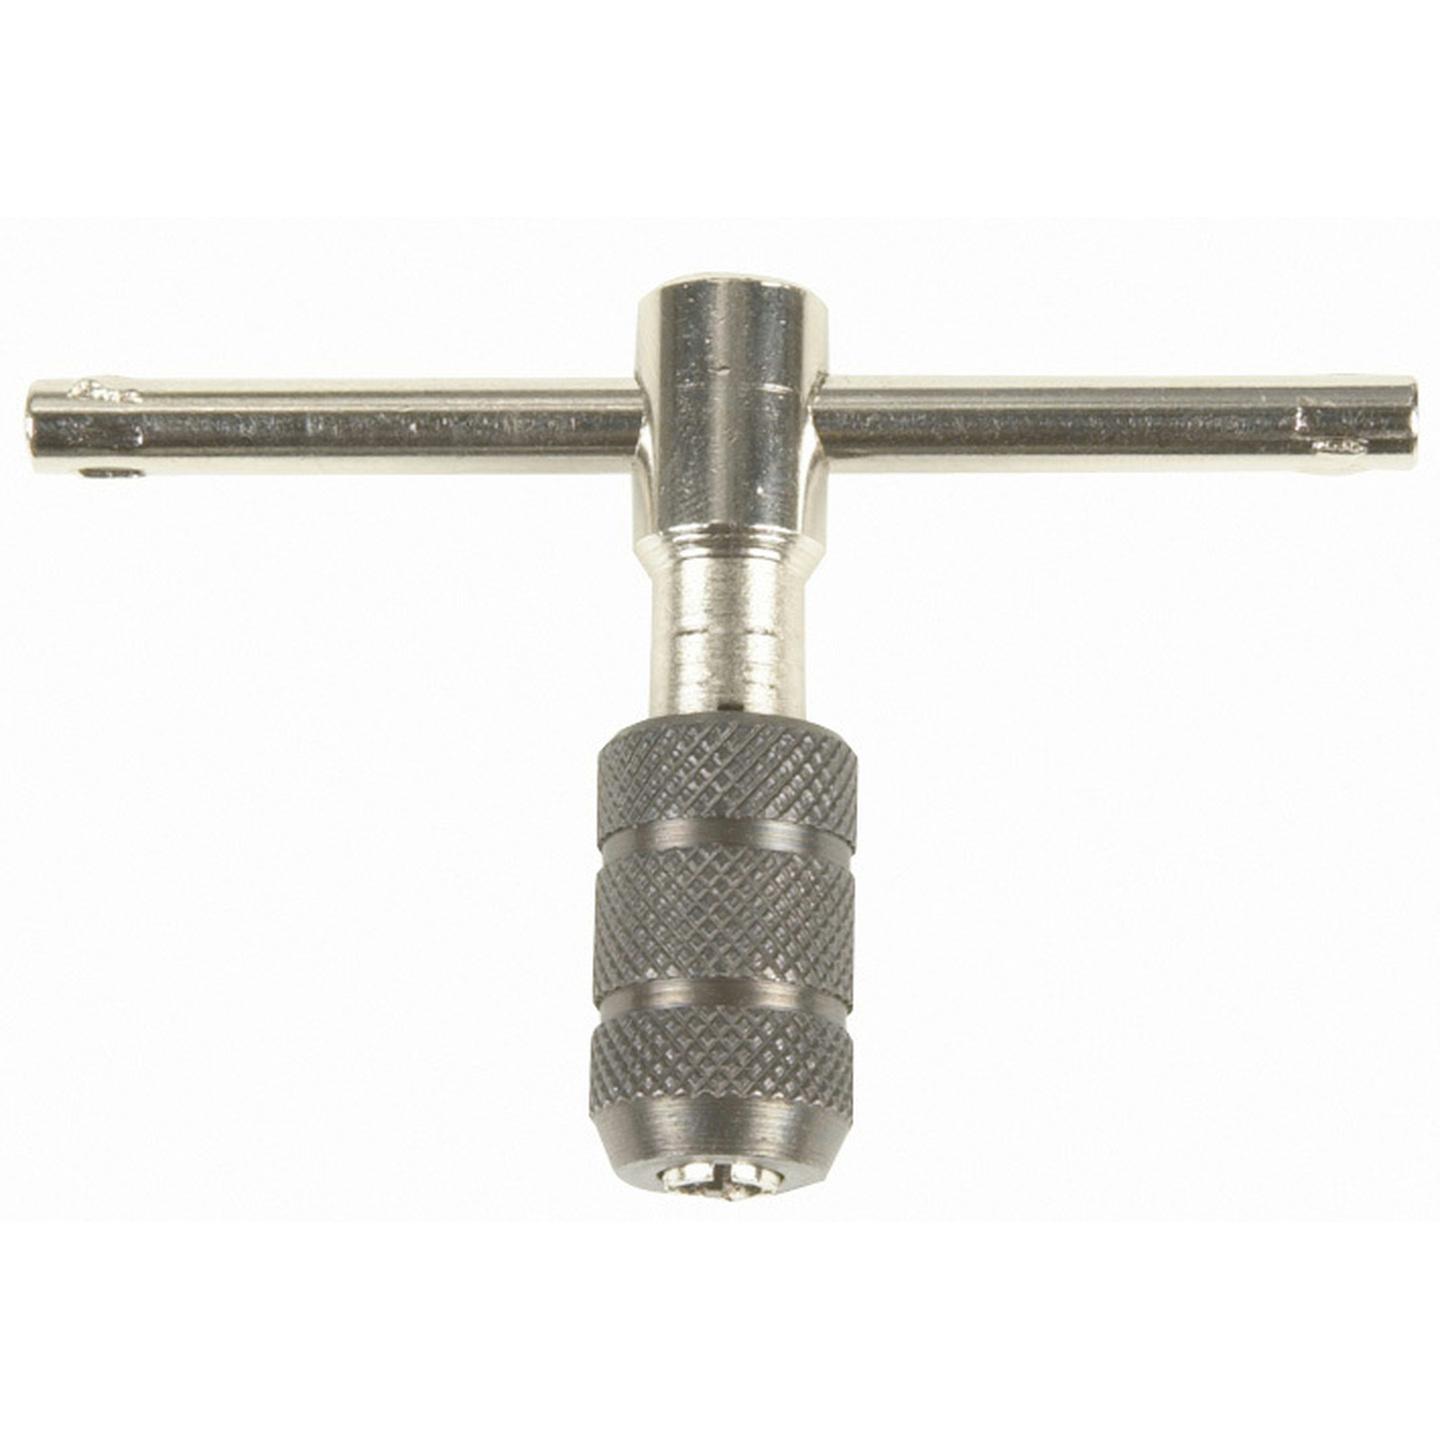 T-Type Tap Wrench